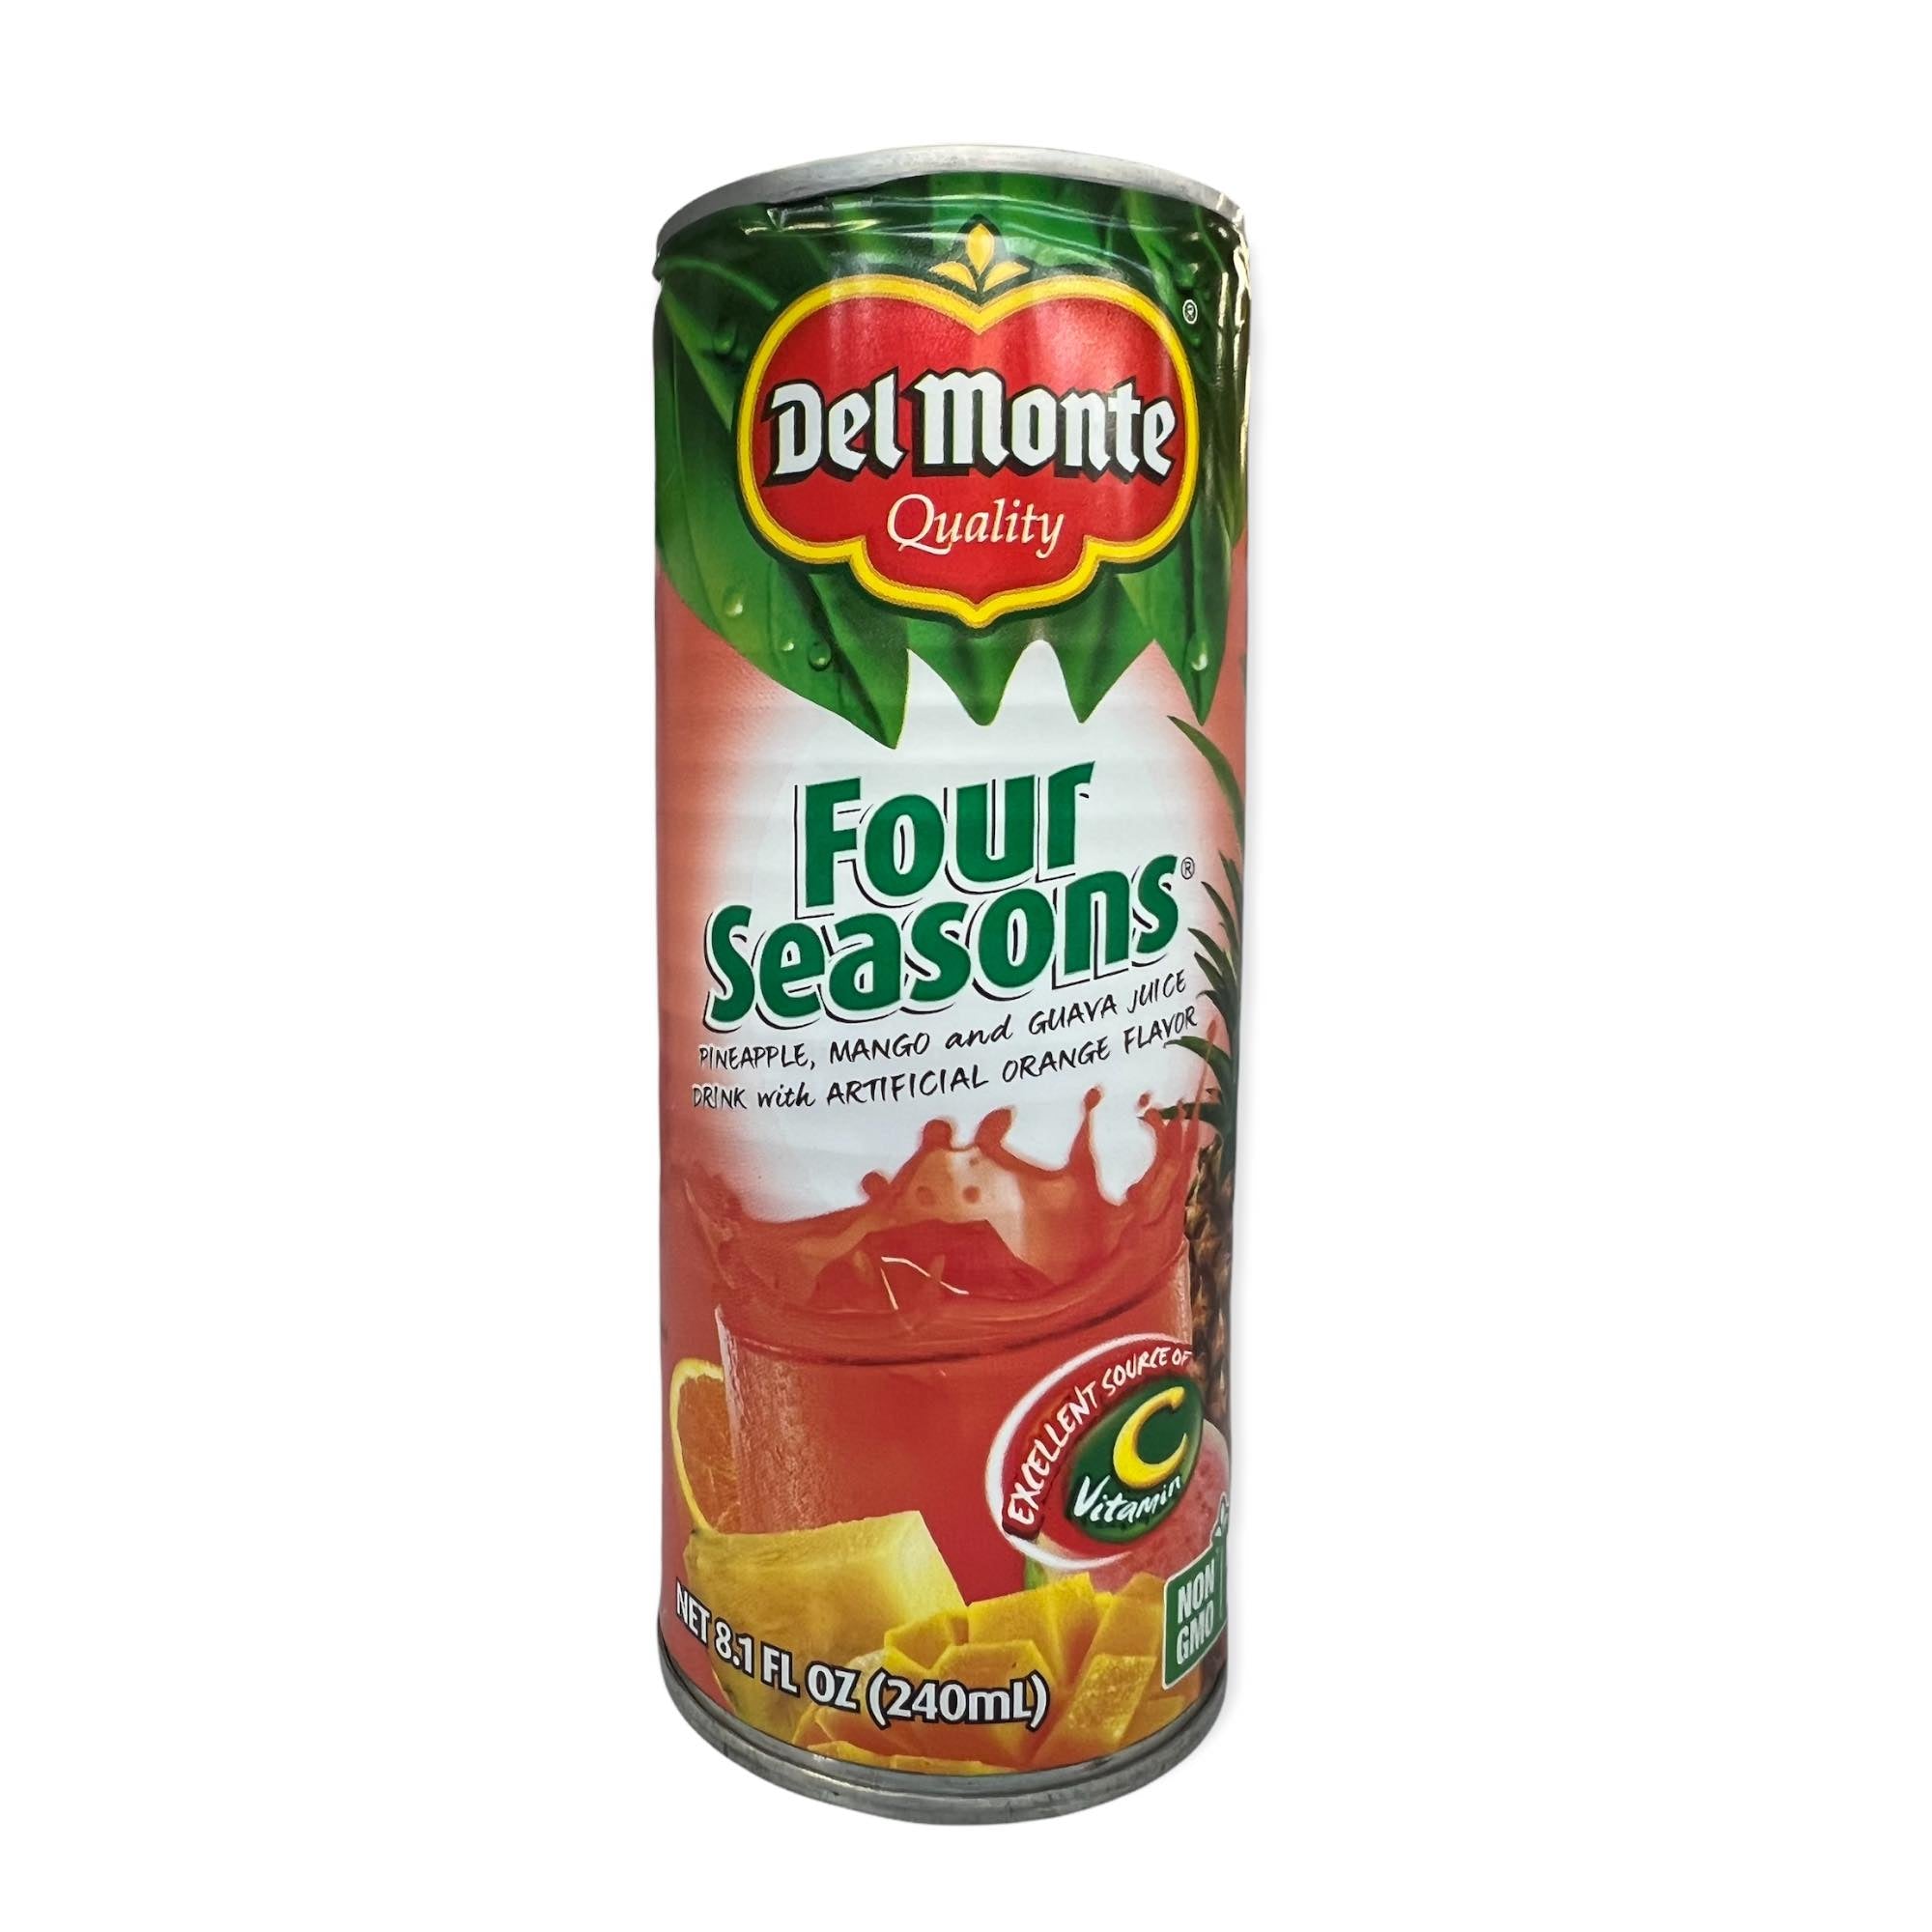 Del Monte Quality - Four Seasons Juice Drink - Pineapple, Mango, and Guava Juice Drink - From Concentrate with Artificial Orange Flavor in can - 240ml